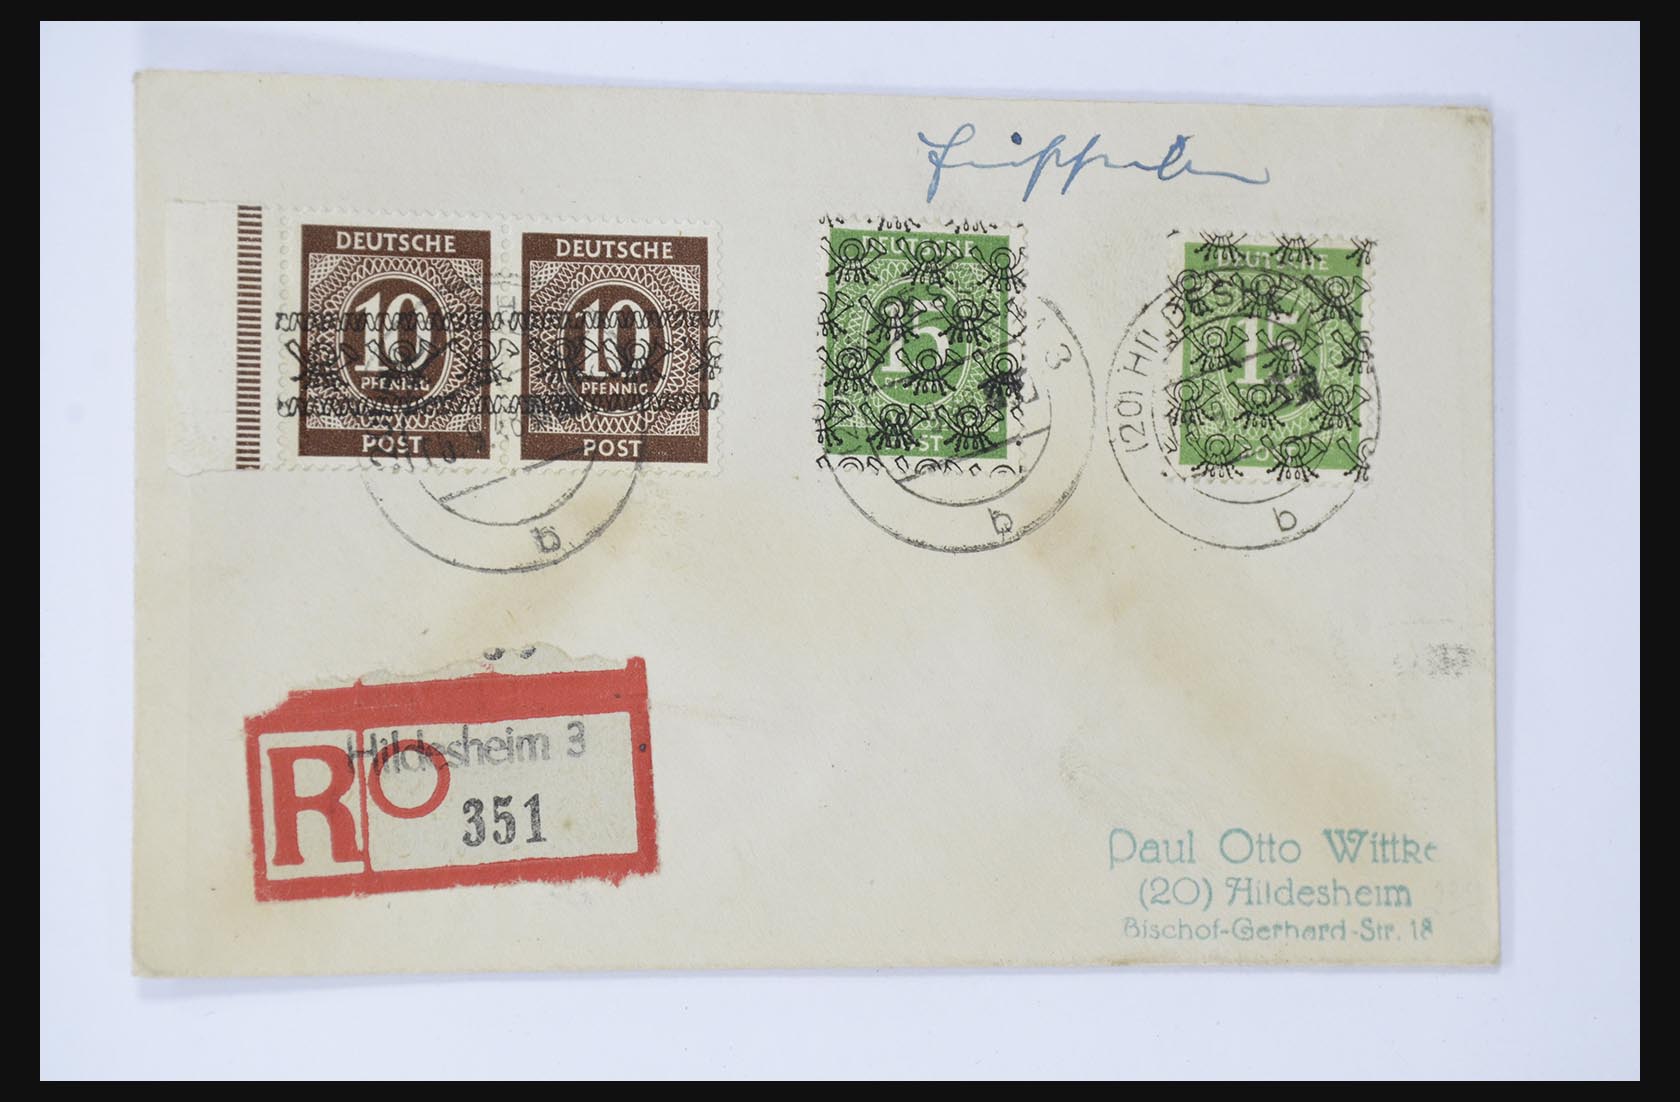 31581 044 - 31581 Germany covers and FDC's 1945-1981.